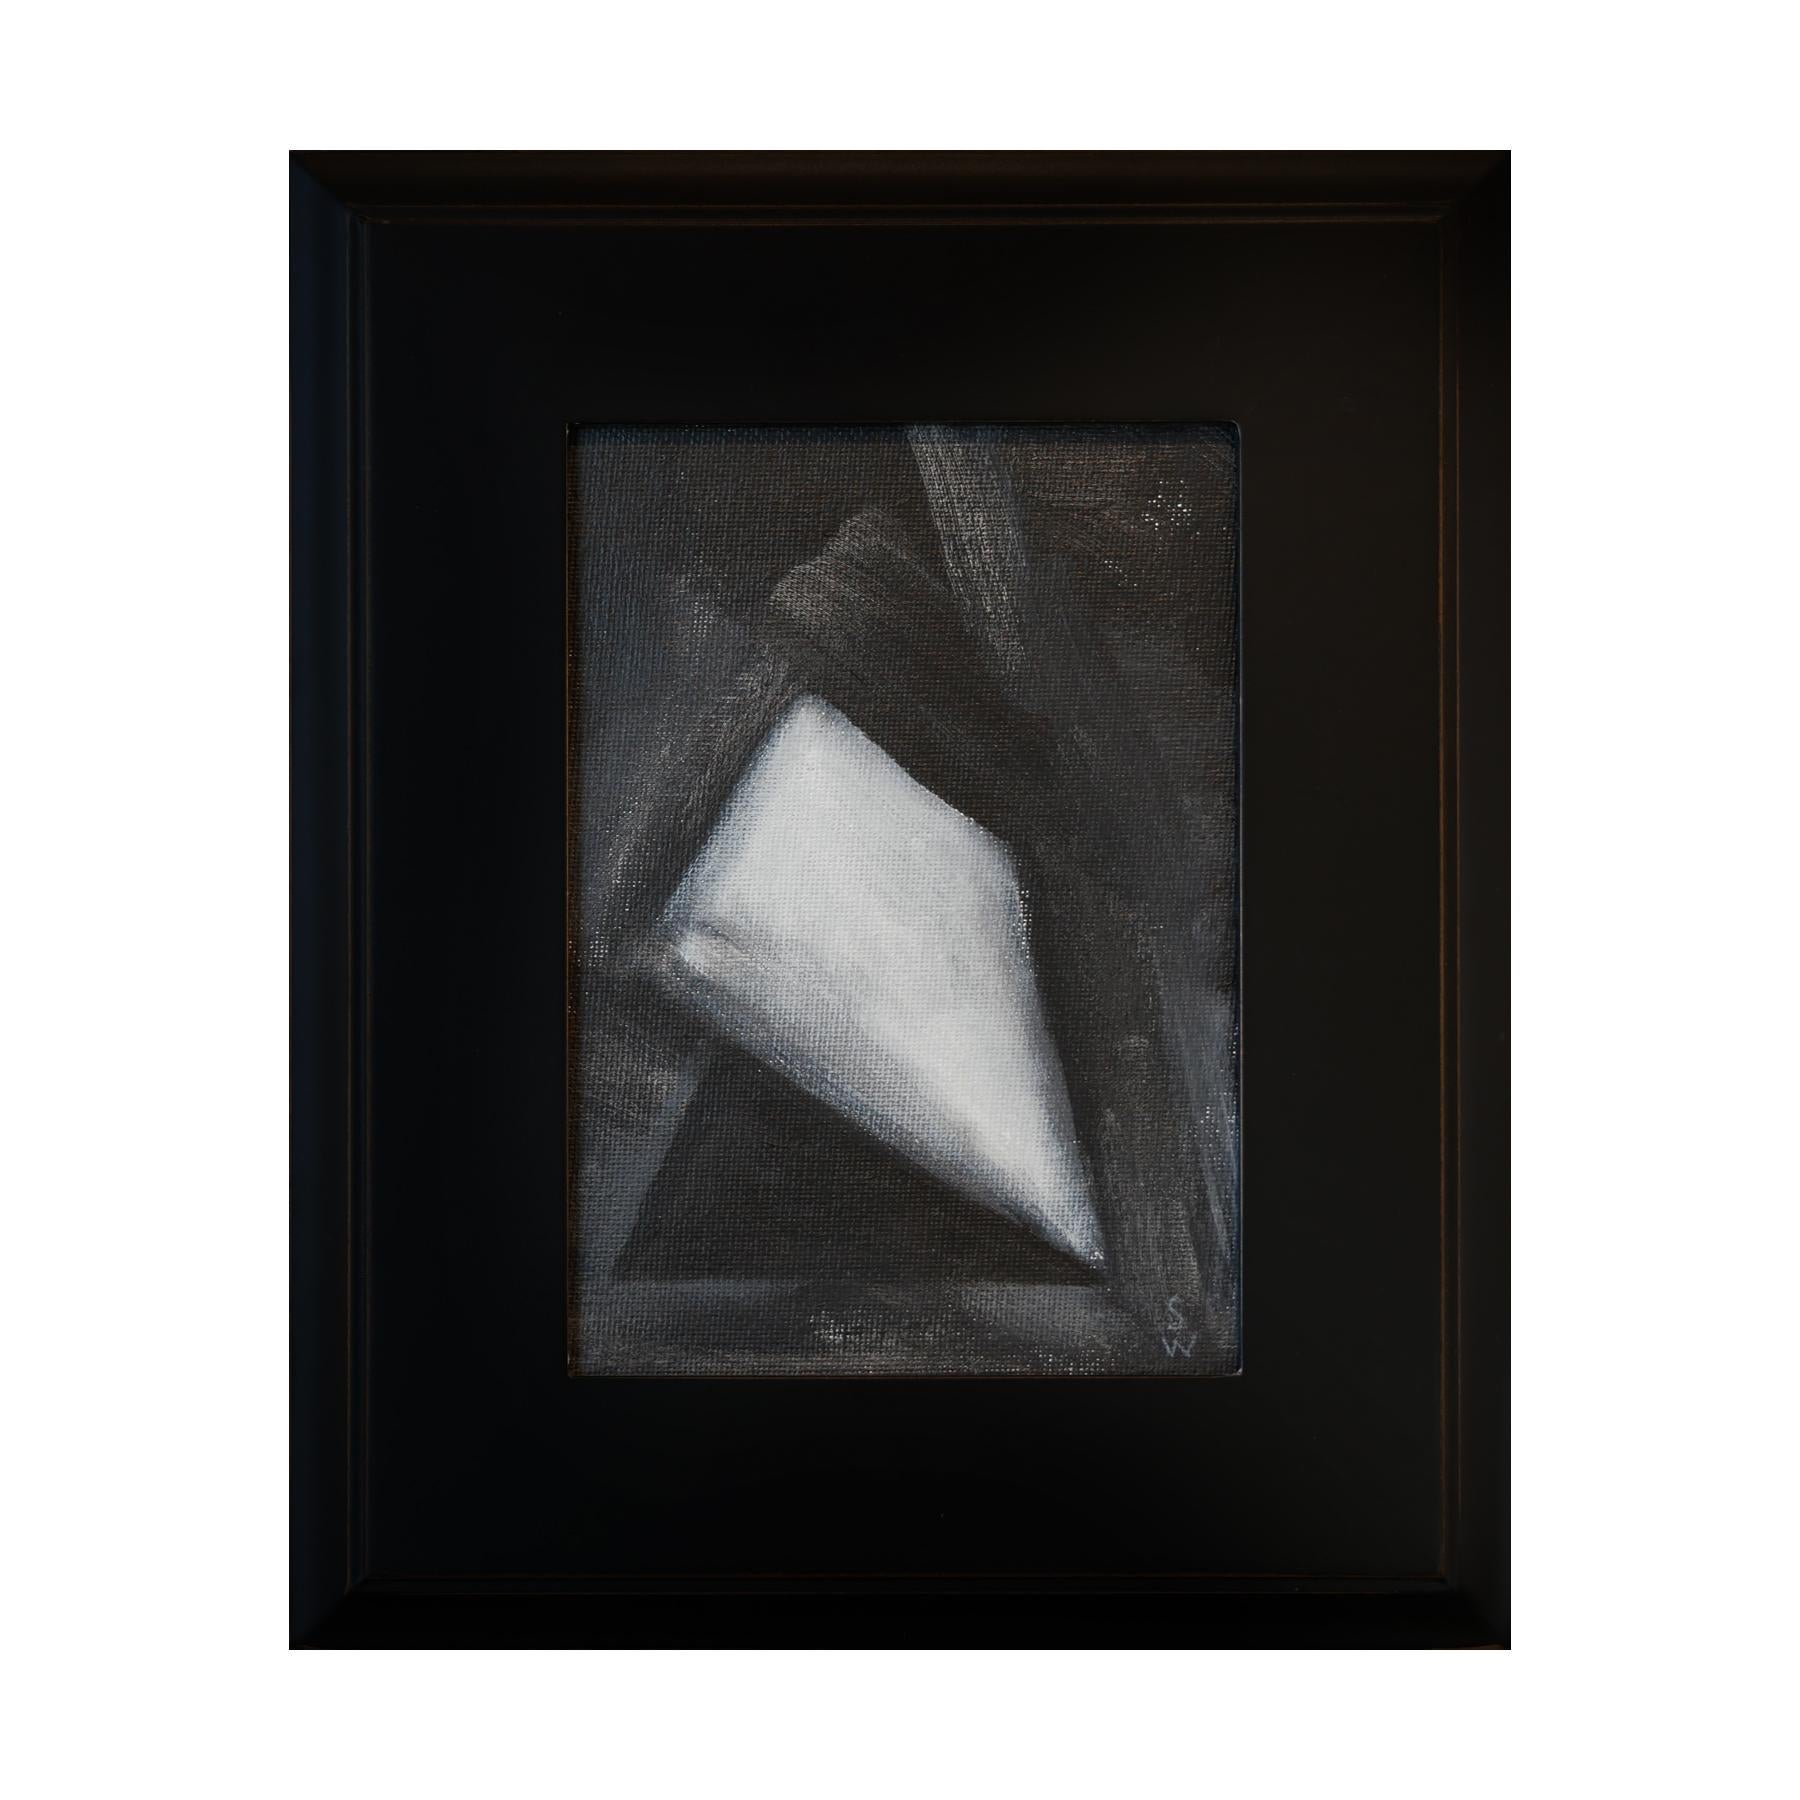 Black and white abstract geometric surrealist painting by Houston, TX artist Scott Woodard. The piece depicts a white plane resembling a laptop rendered against a dark gray background. Signed by the artist at the bottom right. Framed in a black